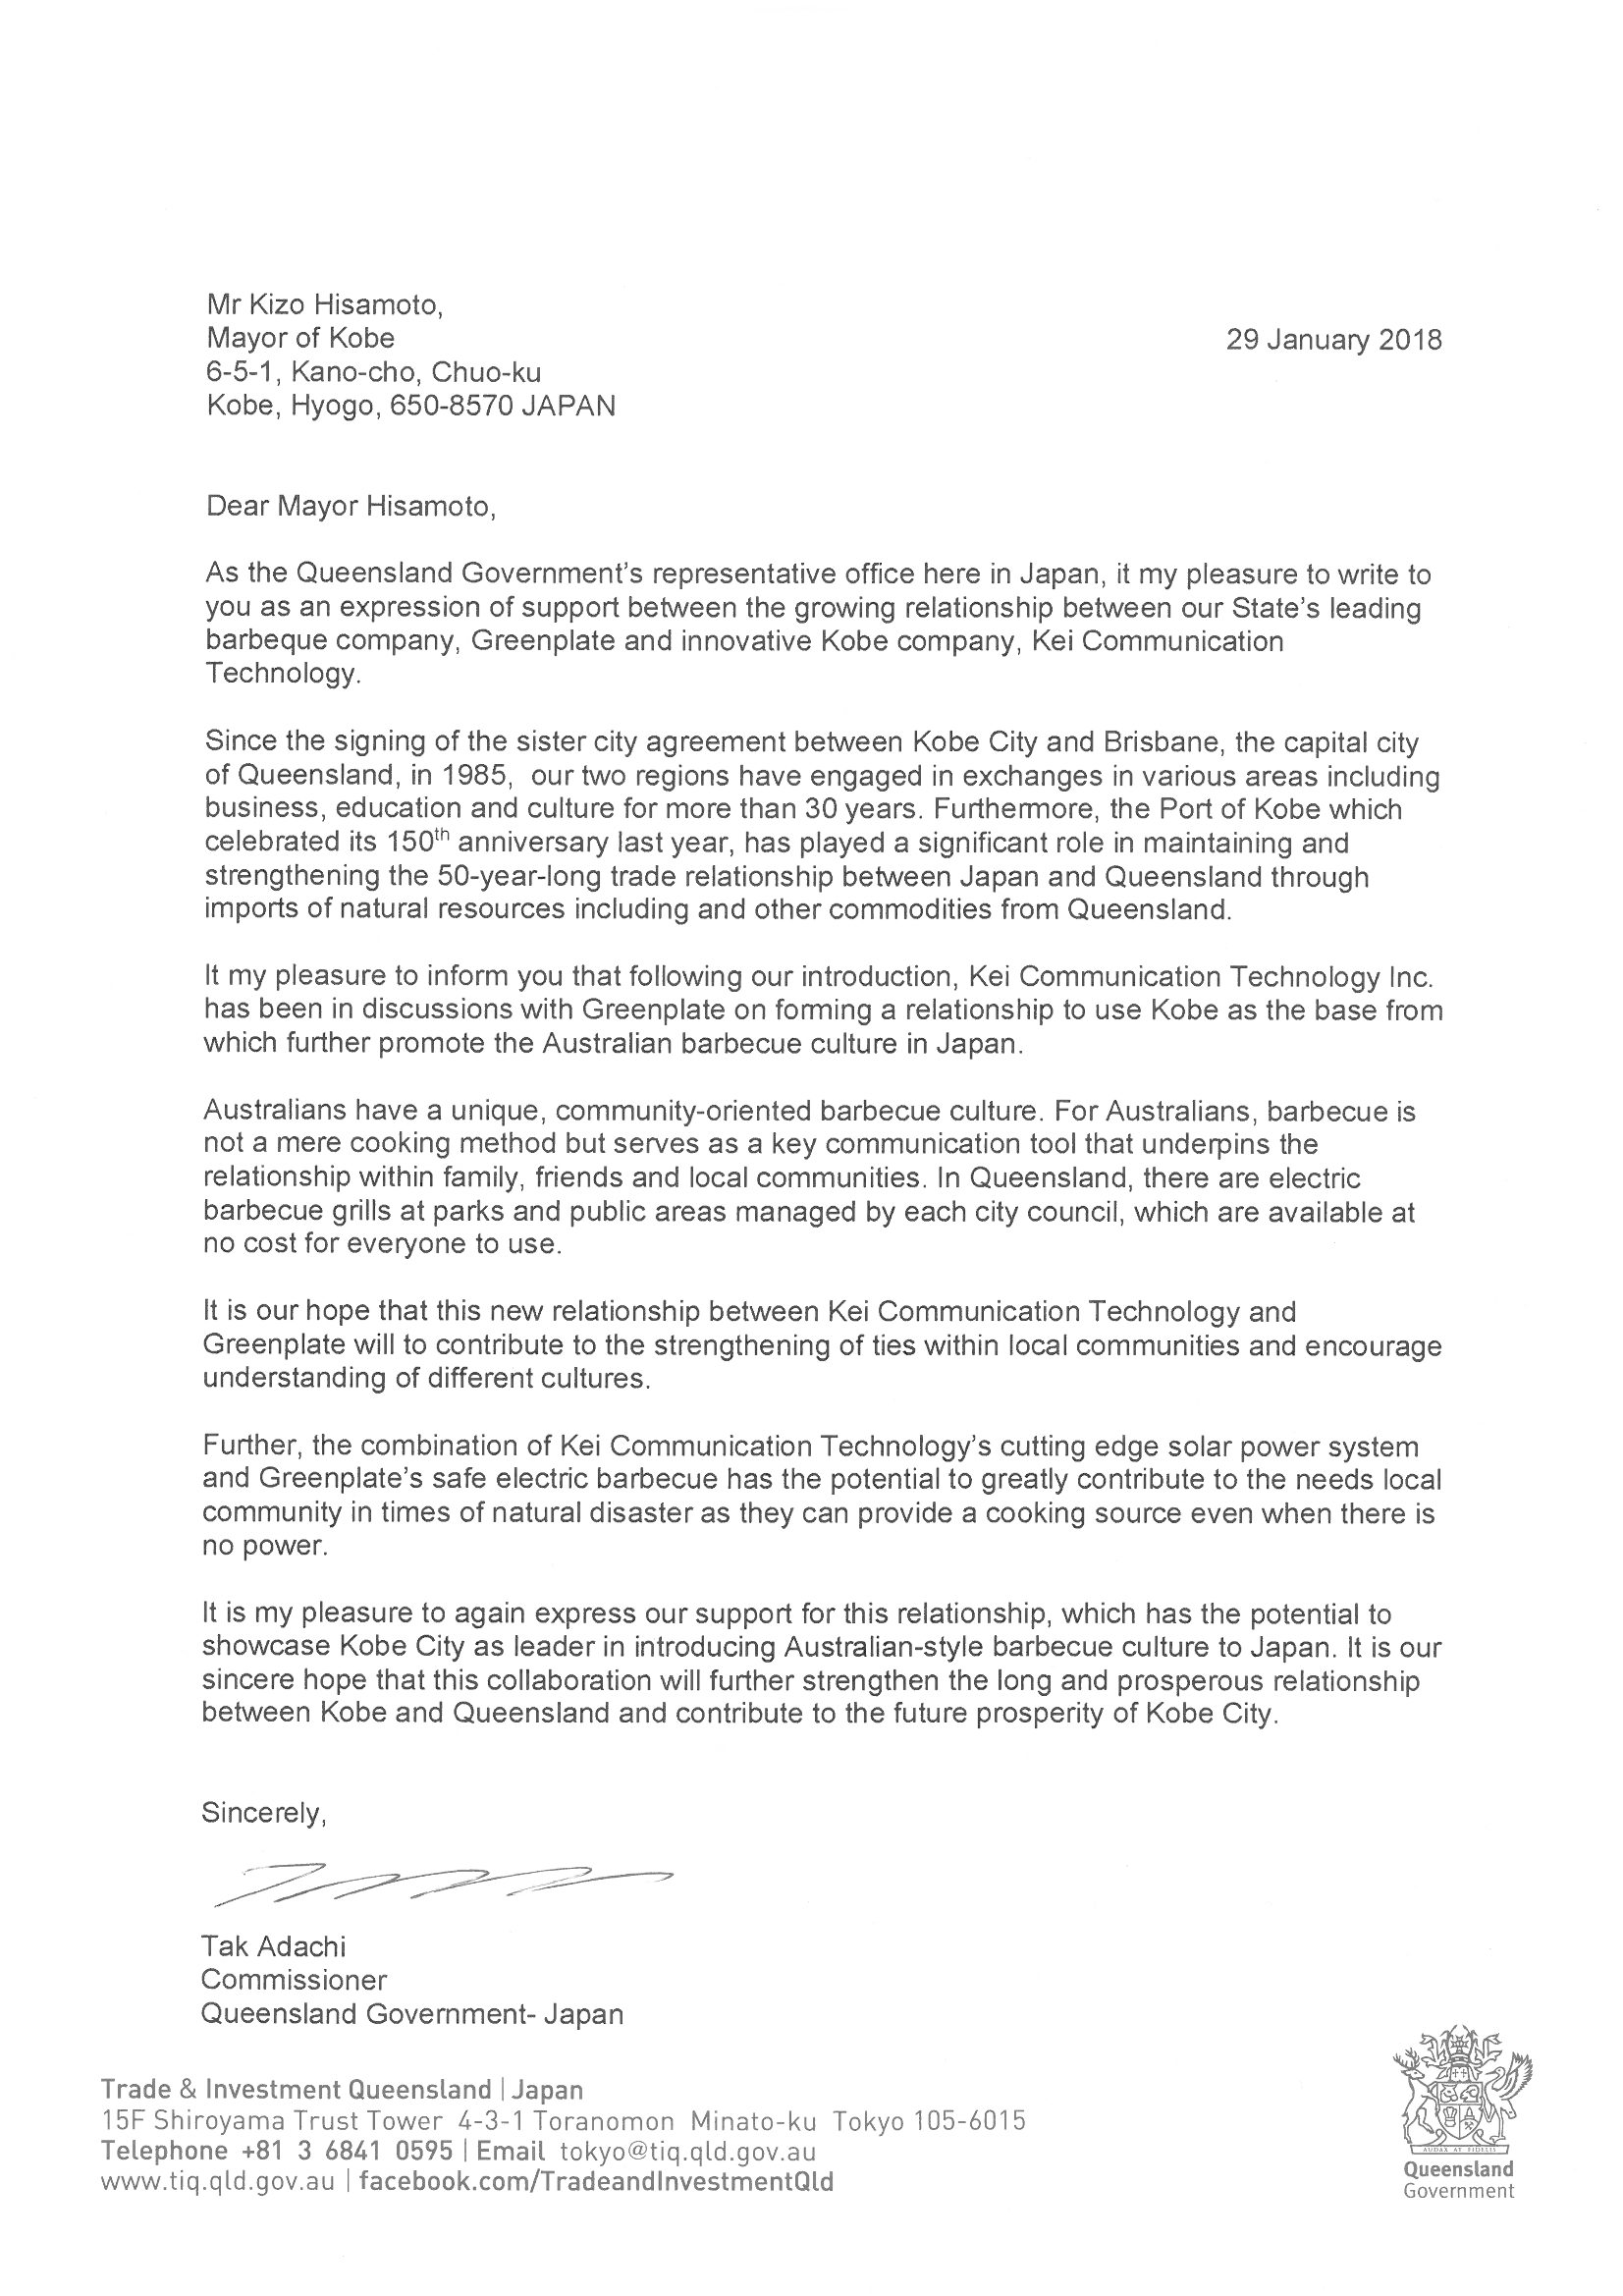 Support Letter from Queensland Government Japan Office.png